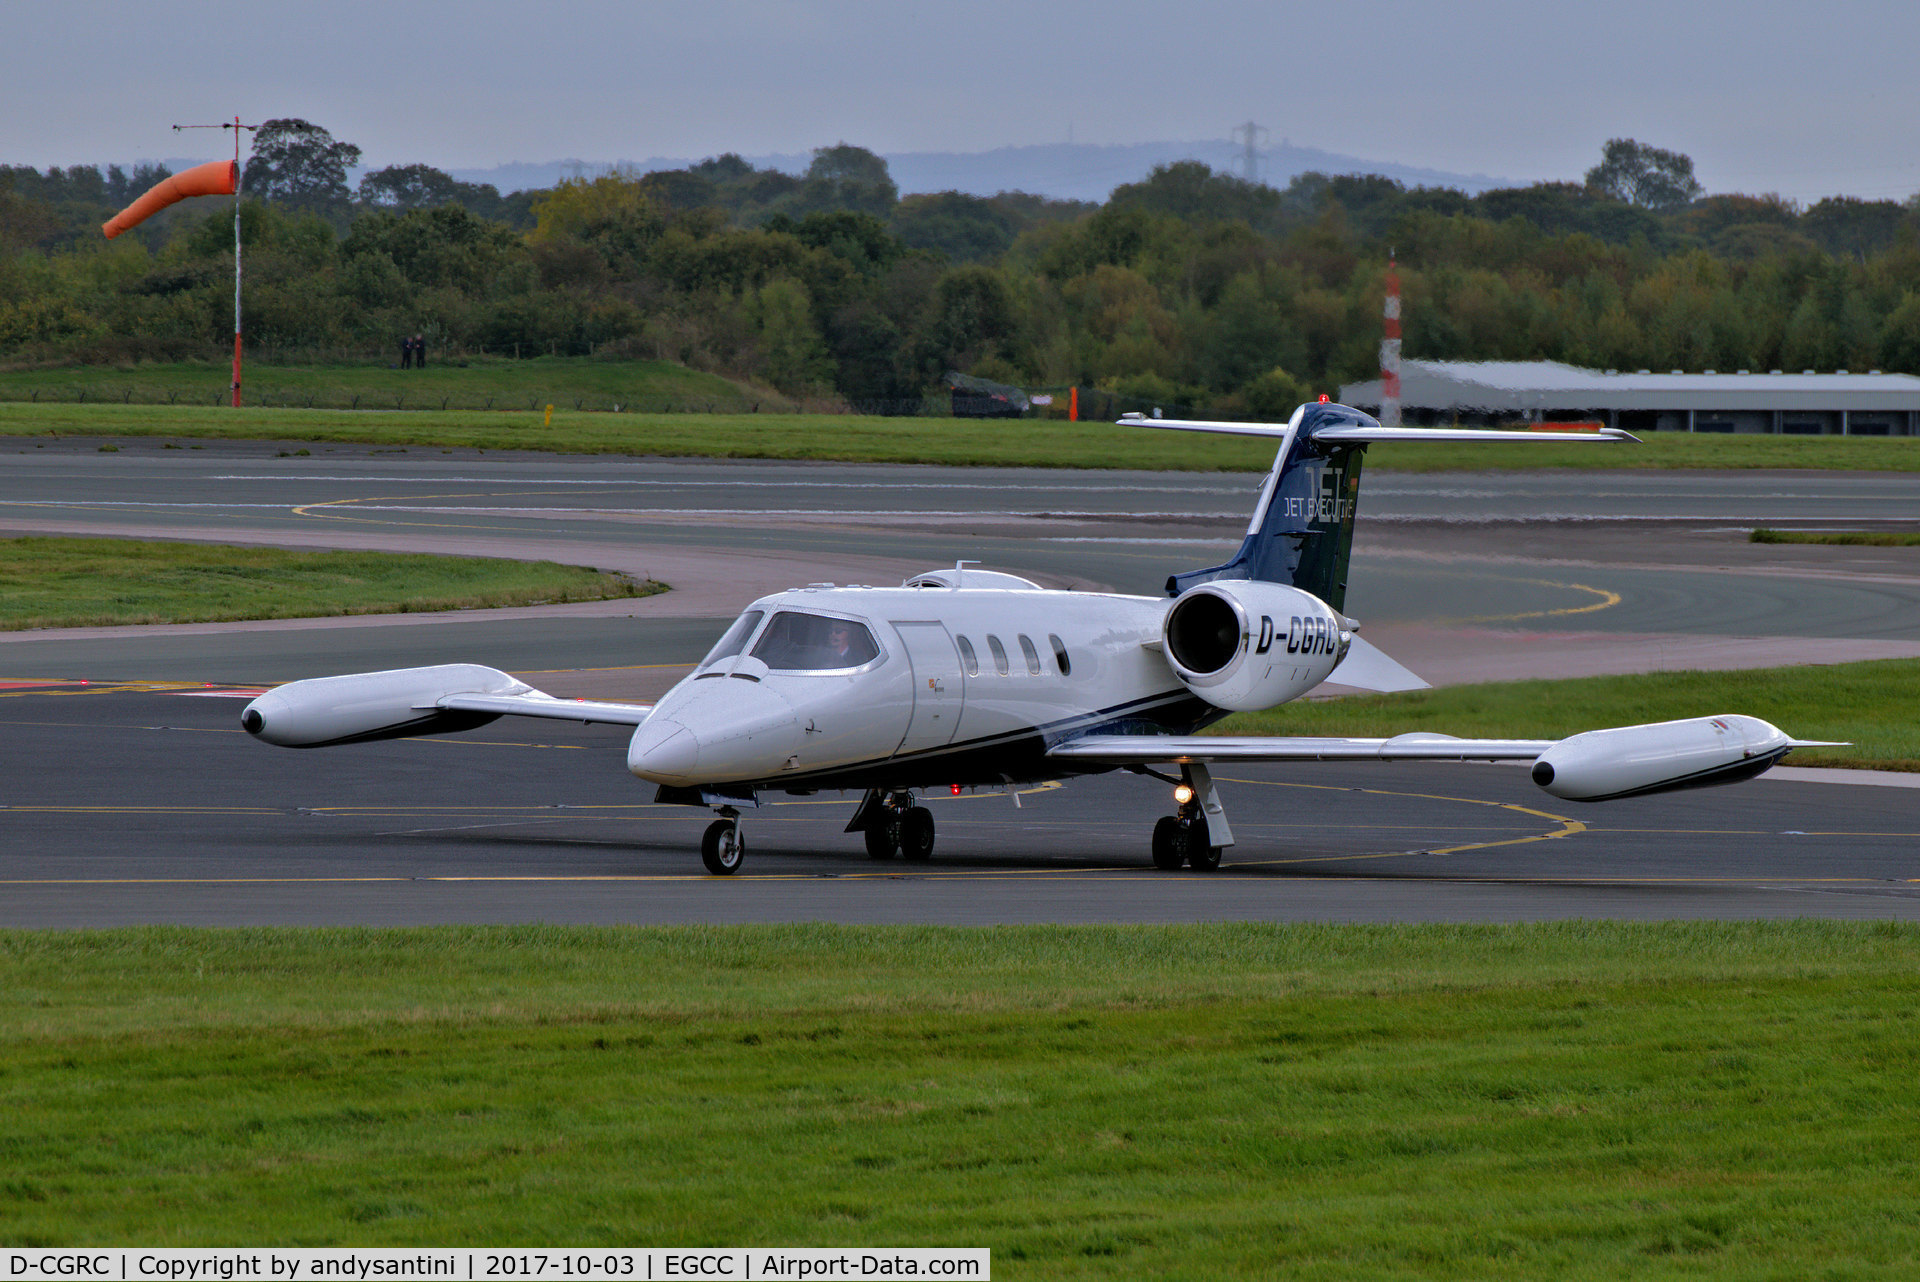 D-CGRC, 1979 Gates Learjet 35A C/N 35-223, taxing in to the [FBO exc ramp]